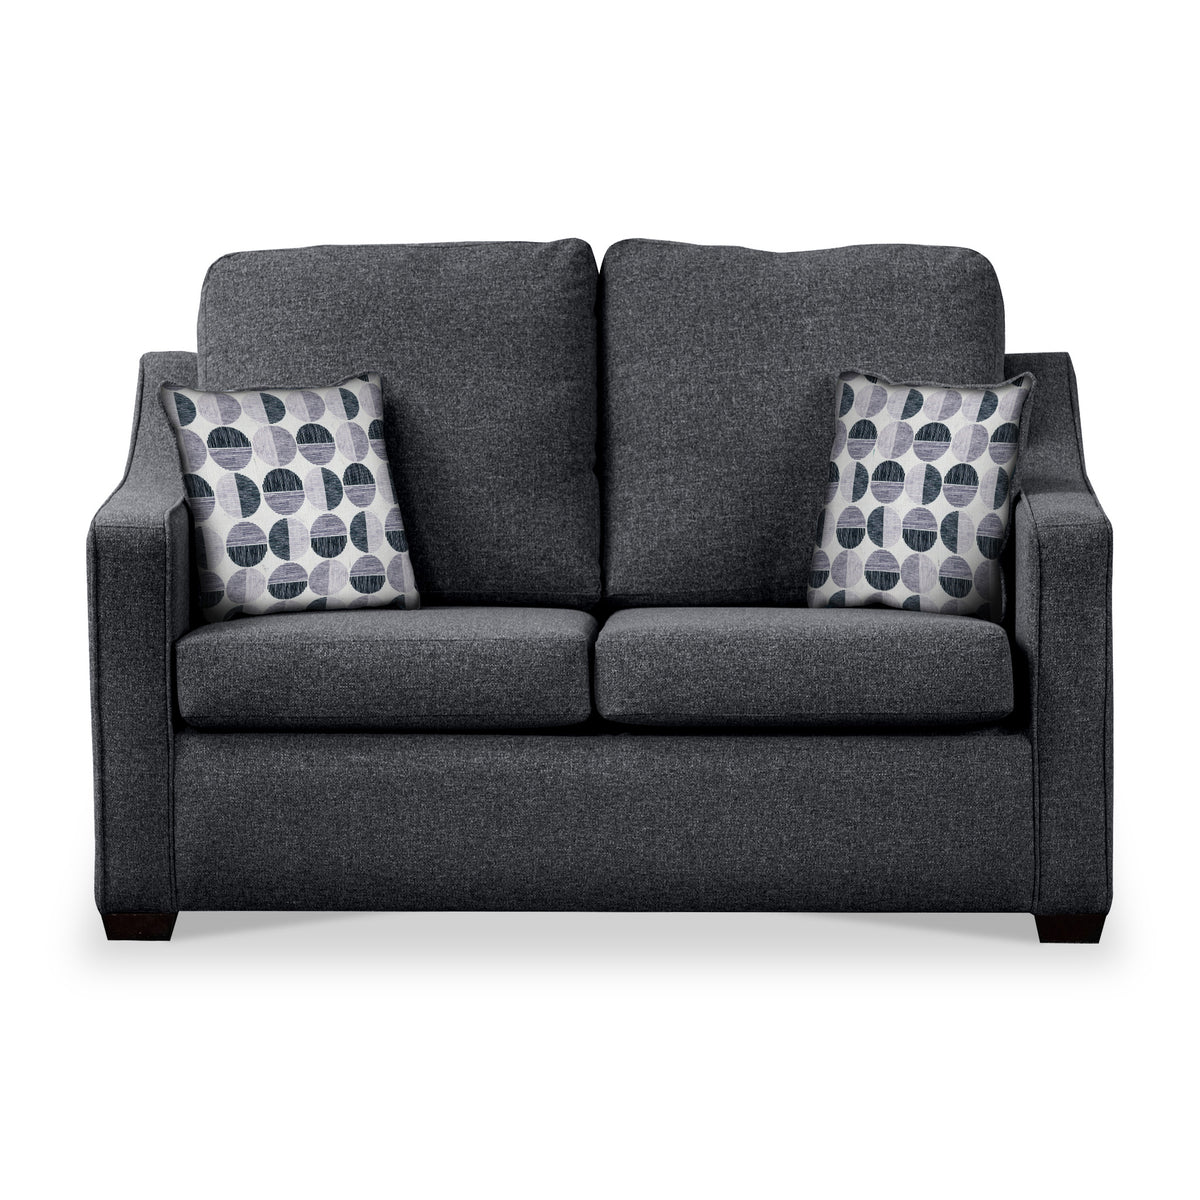 Charlcote Charcoal Faux Linen 2 Seater Sofabed with Mono Scatter Cushions from Roseland Furniture